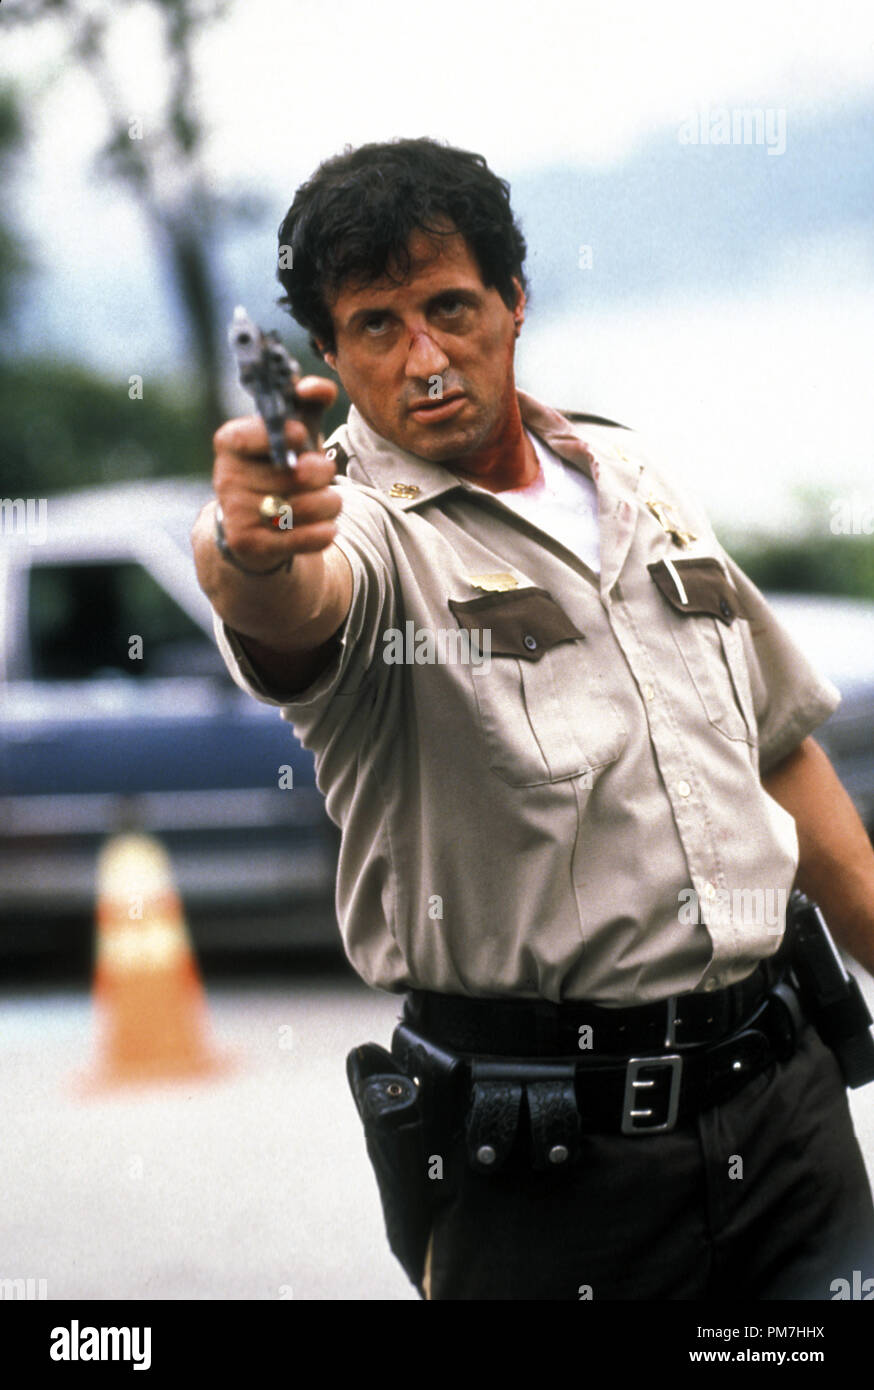 Film Still from 'Cop Land' Sylvester Stallone © 1997 Miramax Films Photo Credit: Sam Emerson   File Reference # 31013375THA  For Editorial Use Only - All Rights Reserved Stock Photo